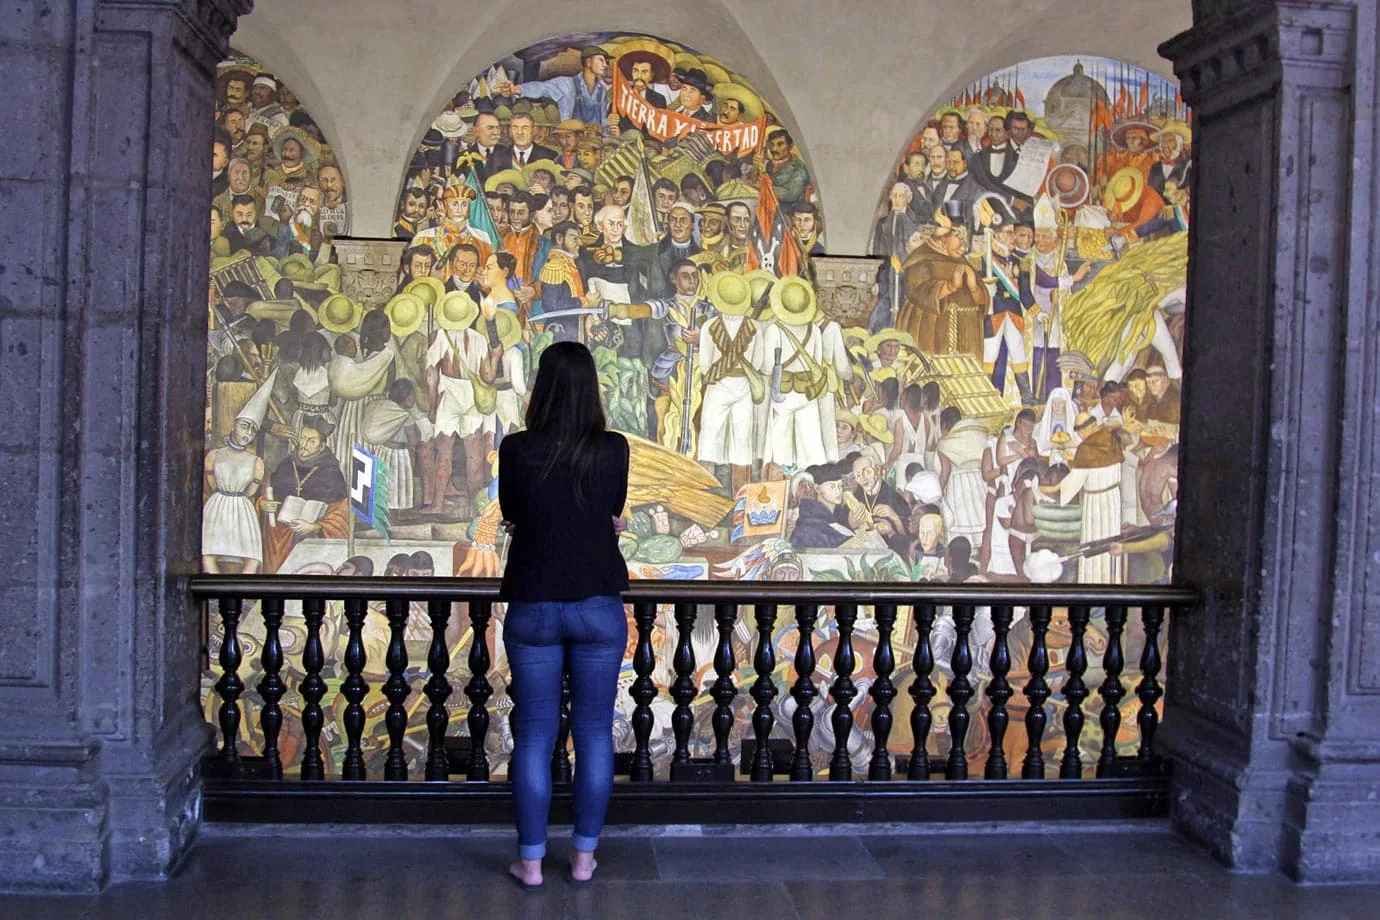 Looking at a mural in the National Palace of Mexico